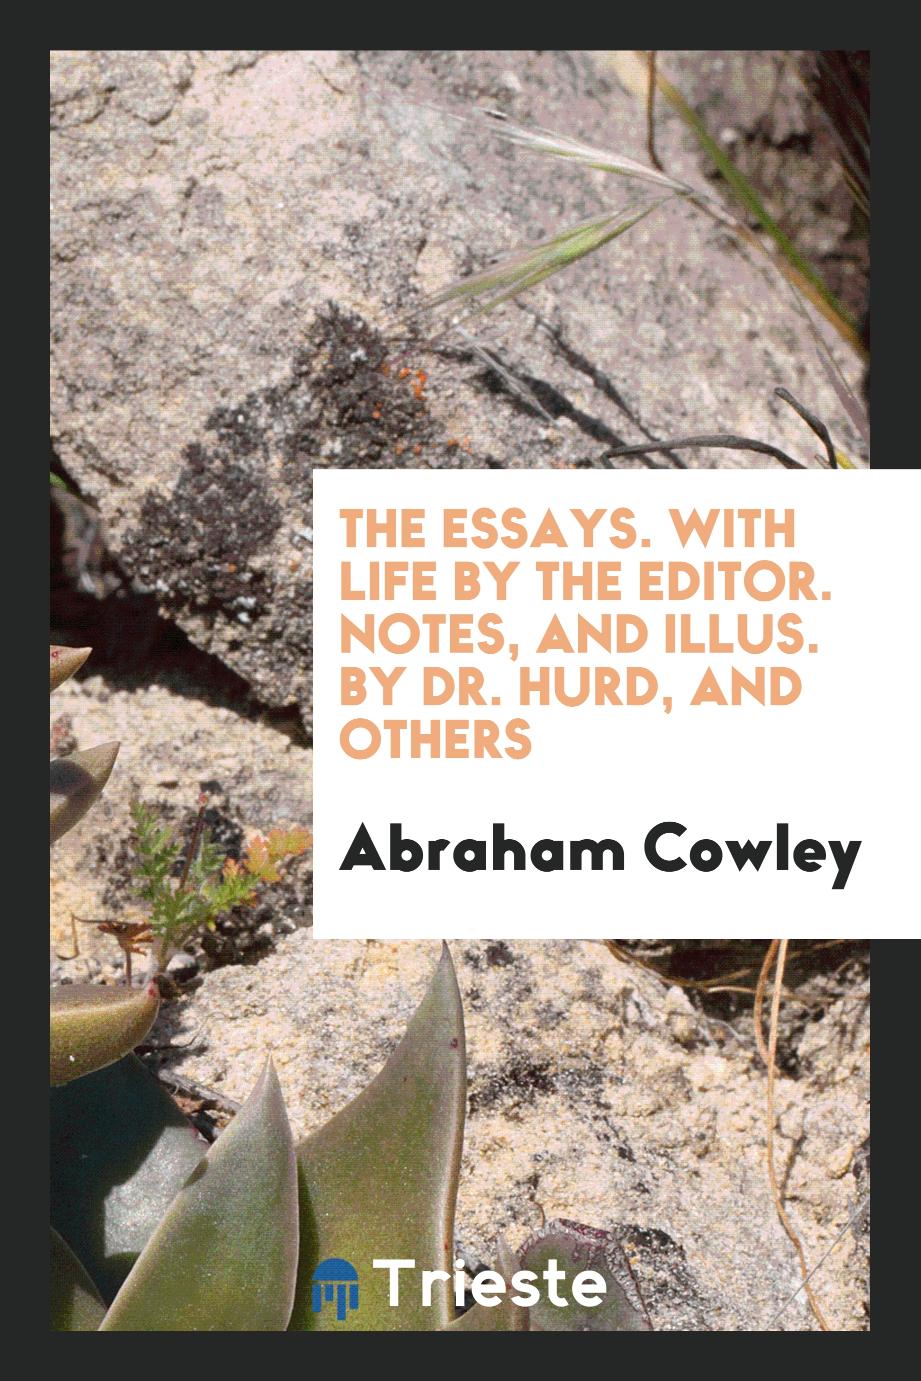 The Essays. With life by the editor. Notes, and illus. by Dr. Hurd, and others